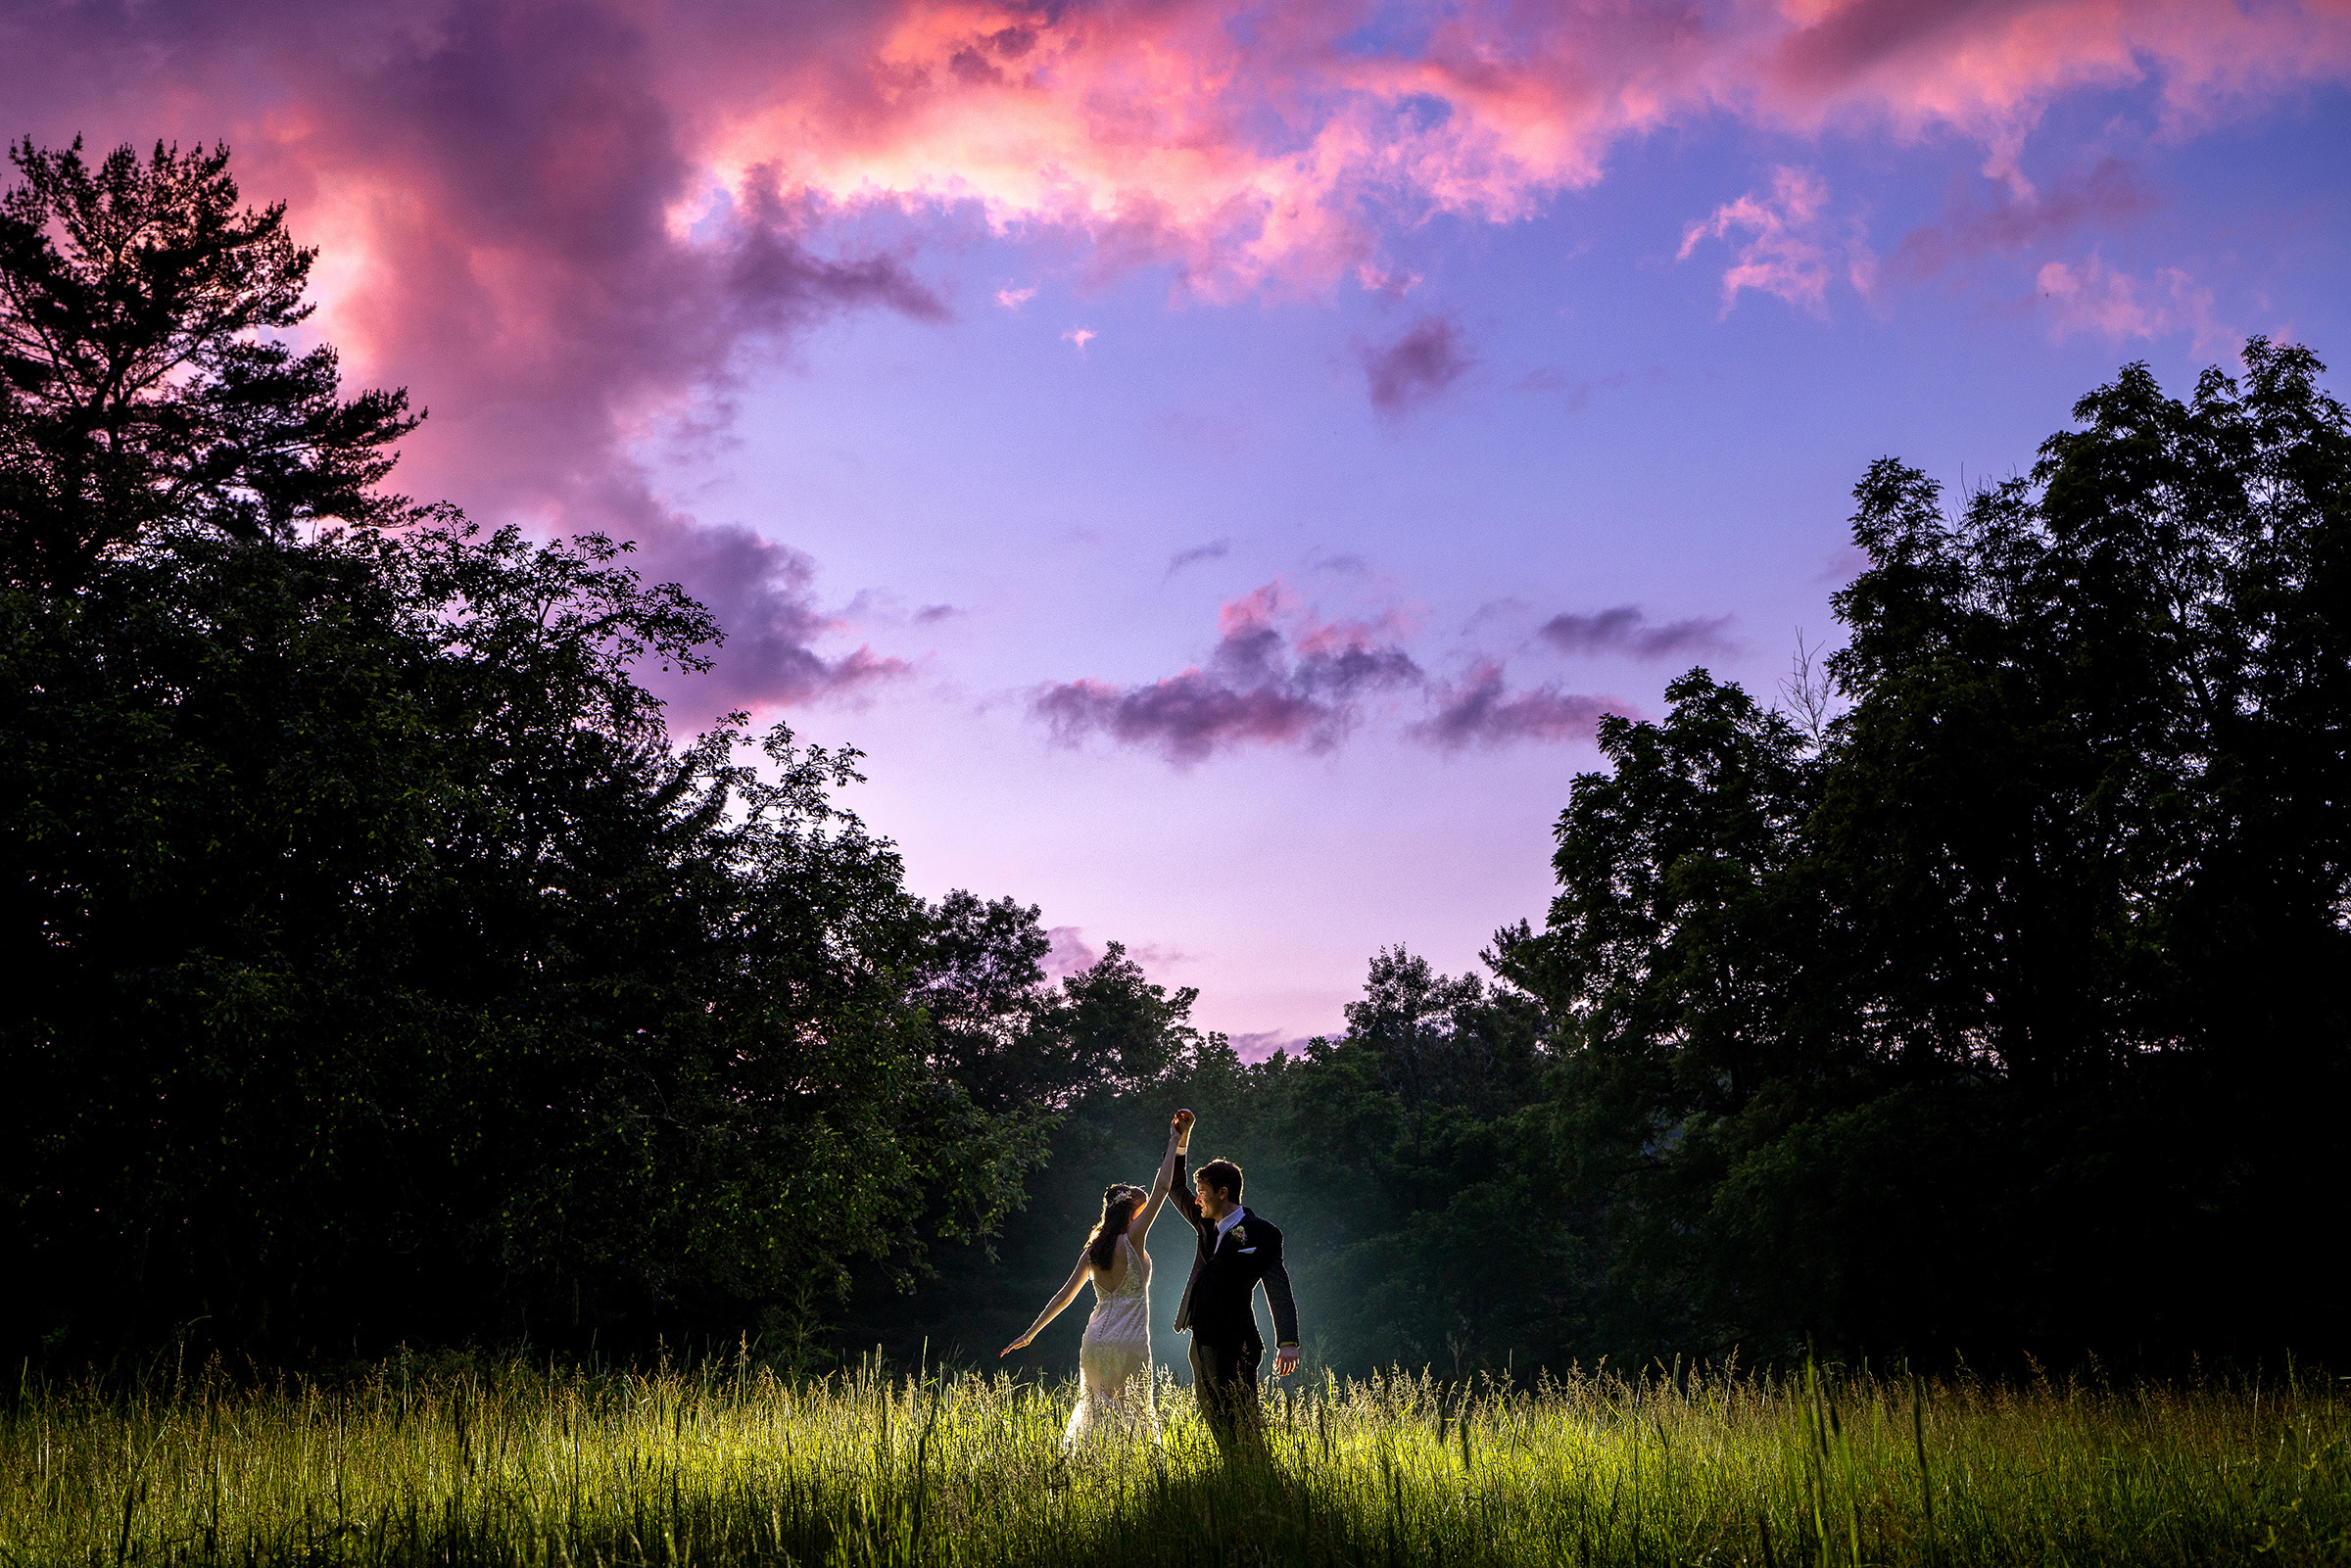 Breathtaking Ceremony at Winnebago Springs, MN by La Crosse photographer, Jeff Wiswell of J L Wiswell Photography